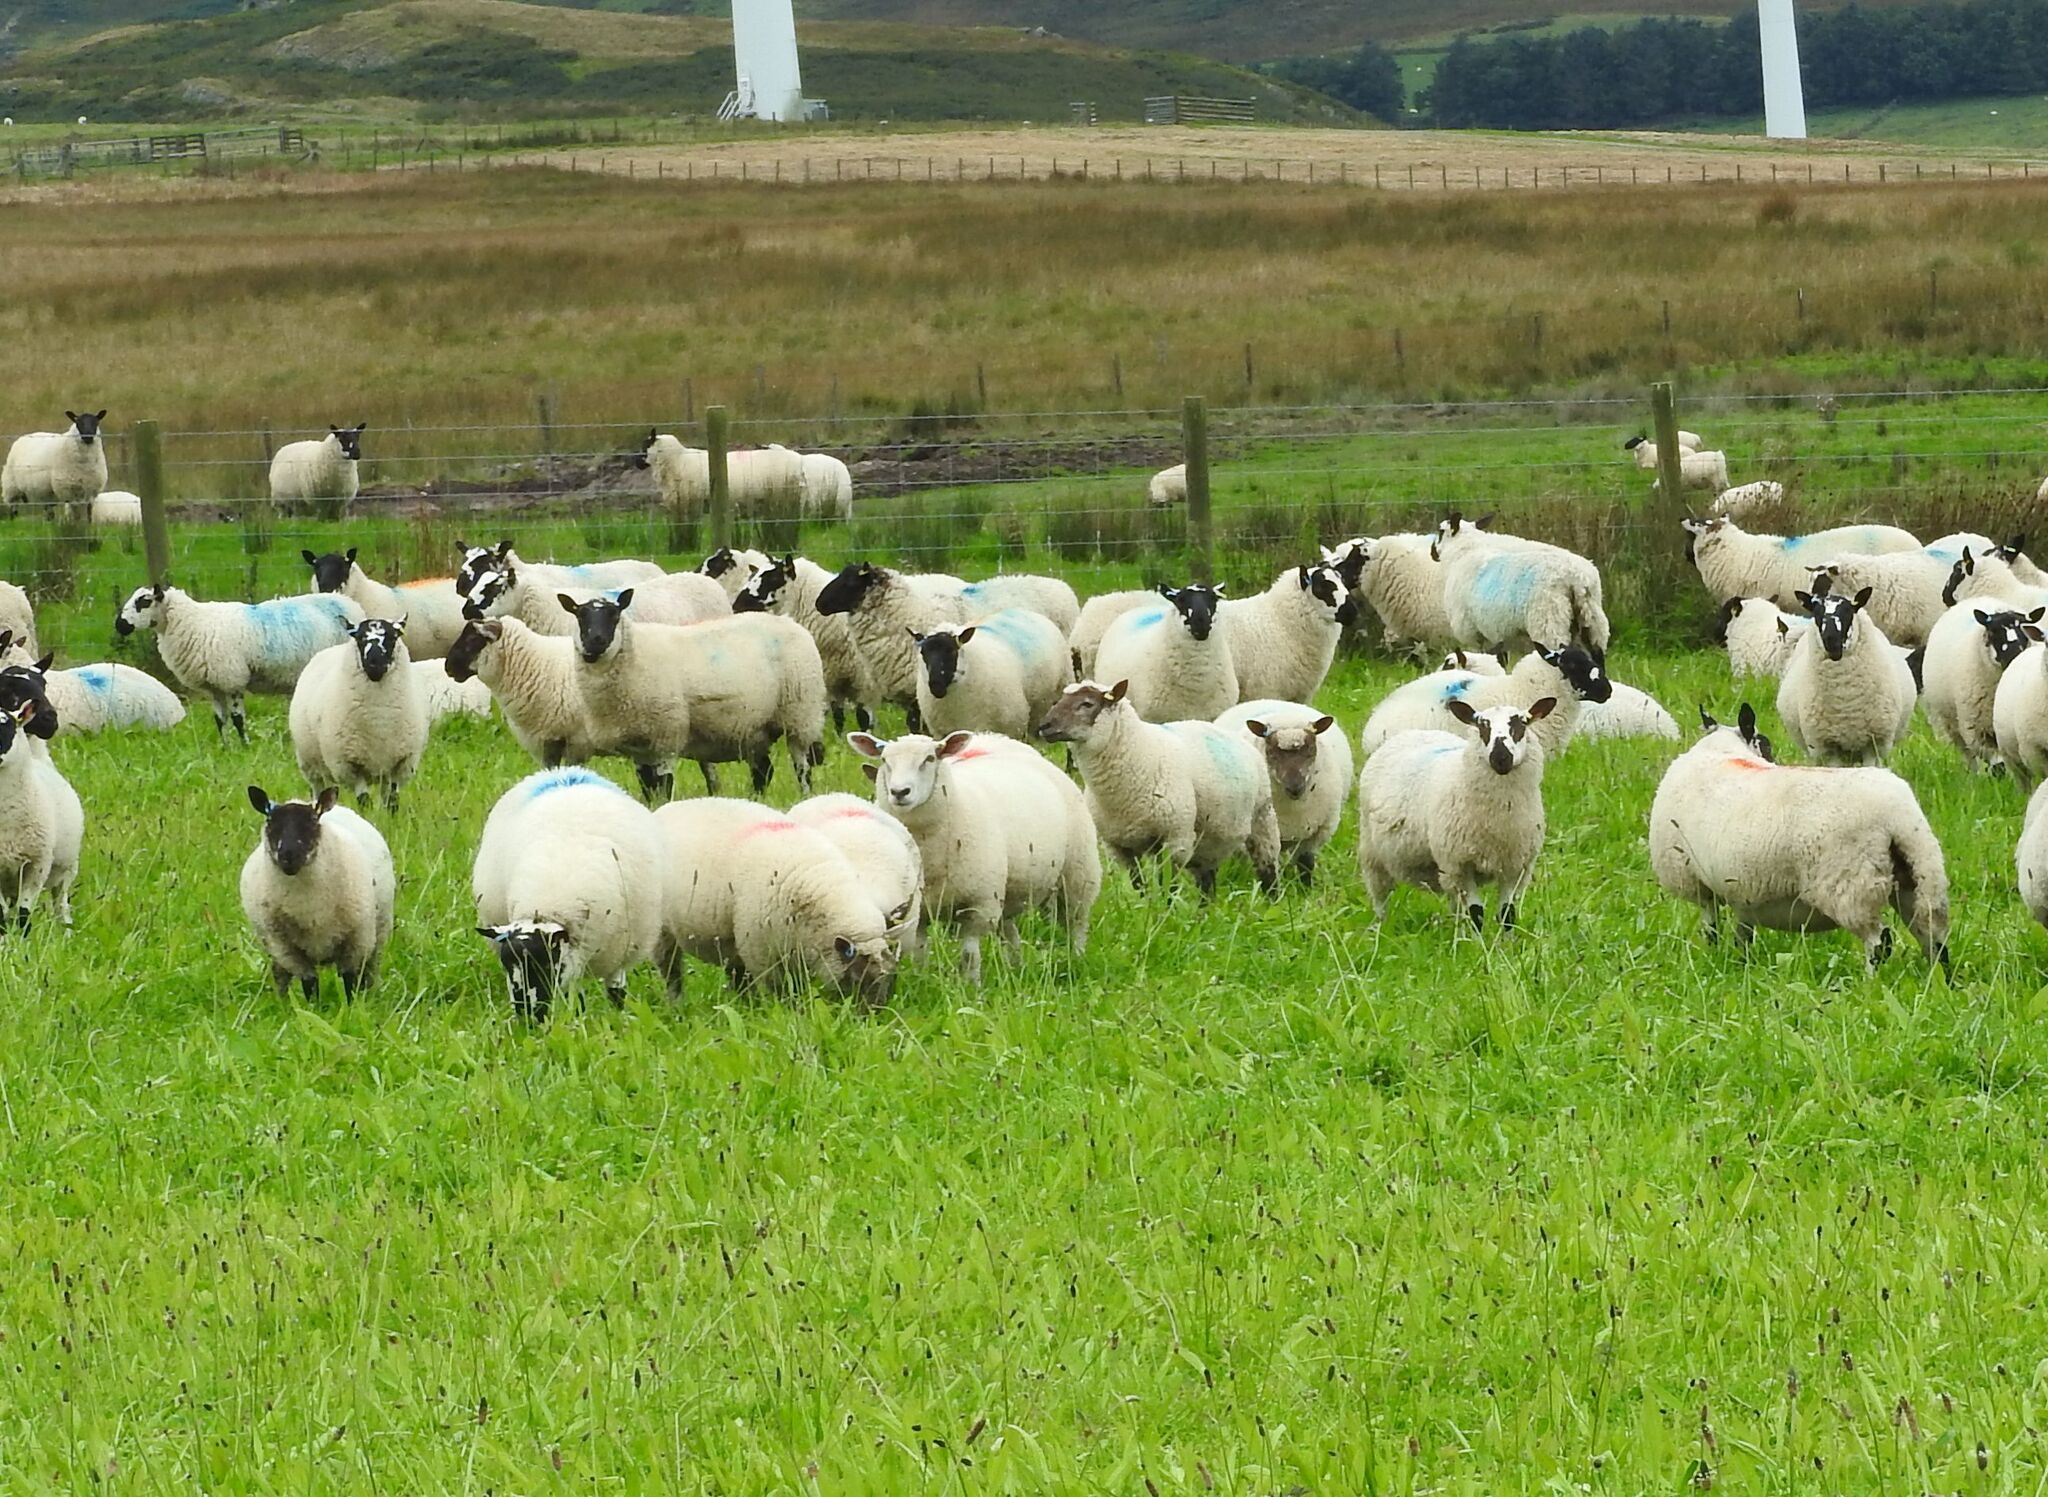 Sheep on plantain red clover and ryegrass